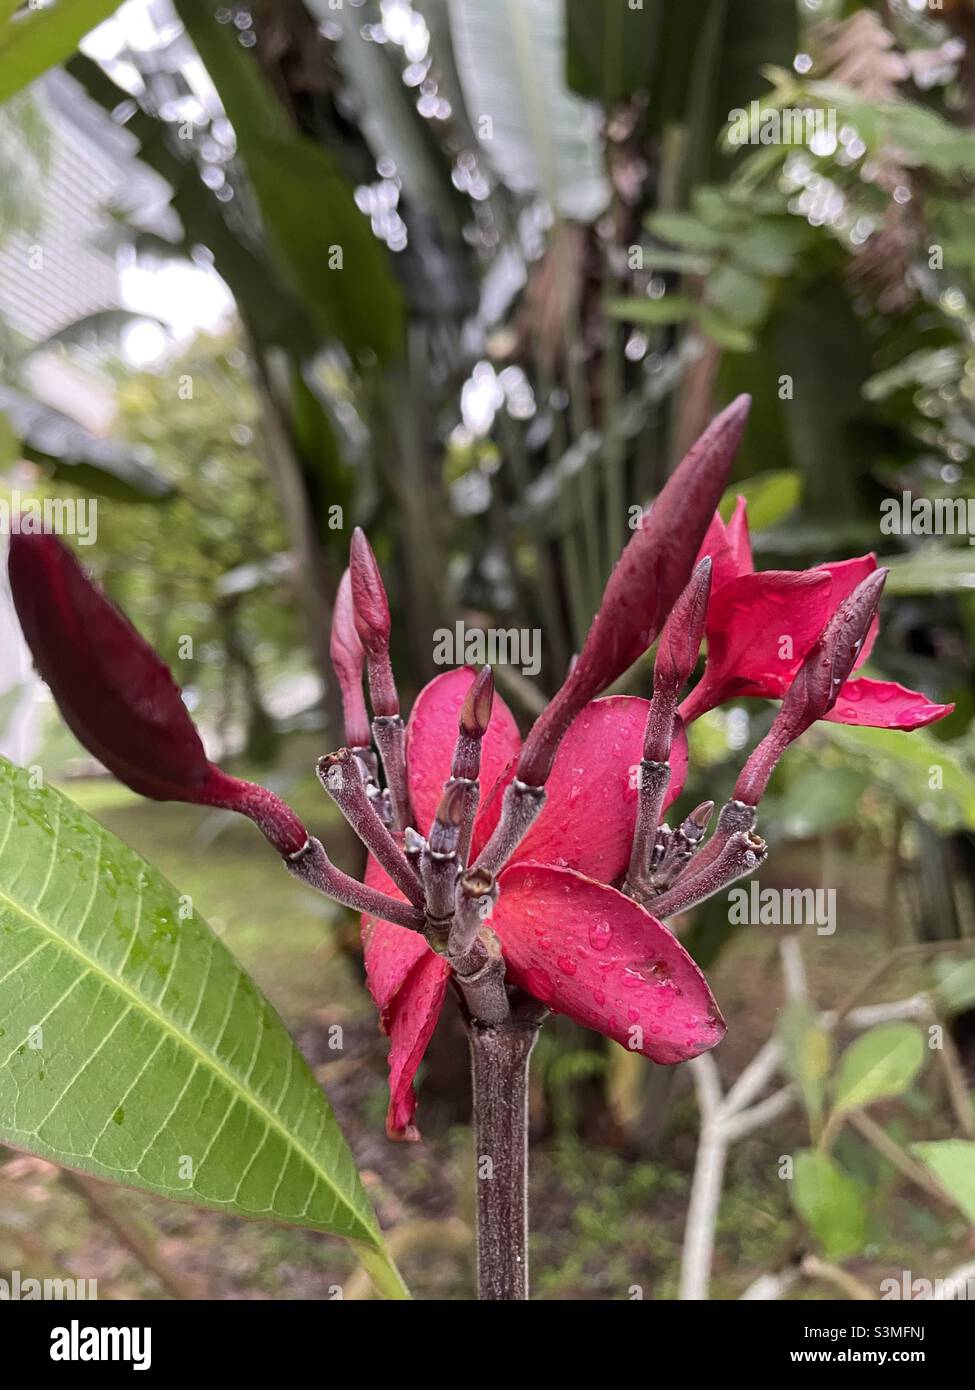 Red flowers with stalks Stock Photo